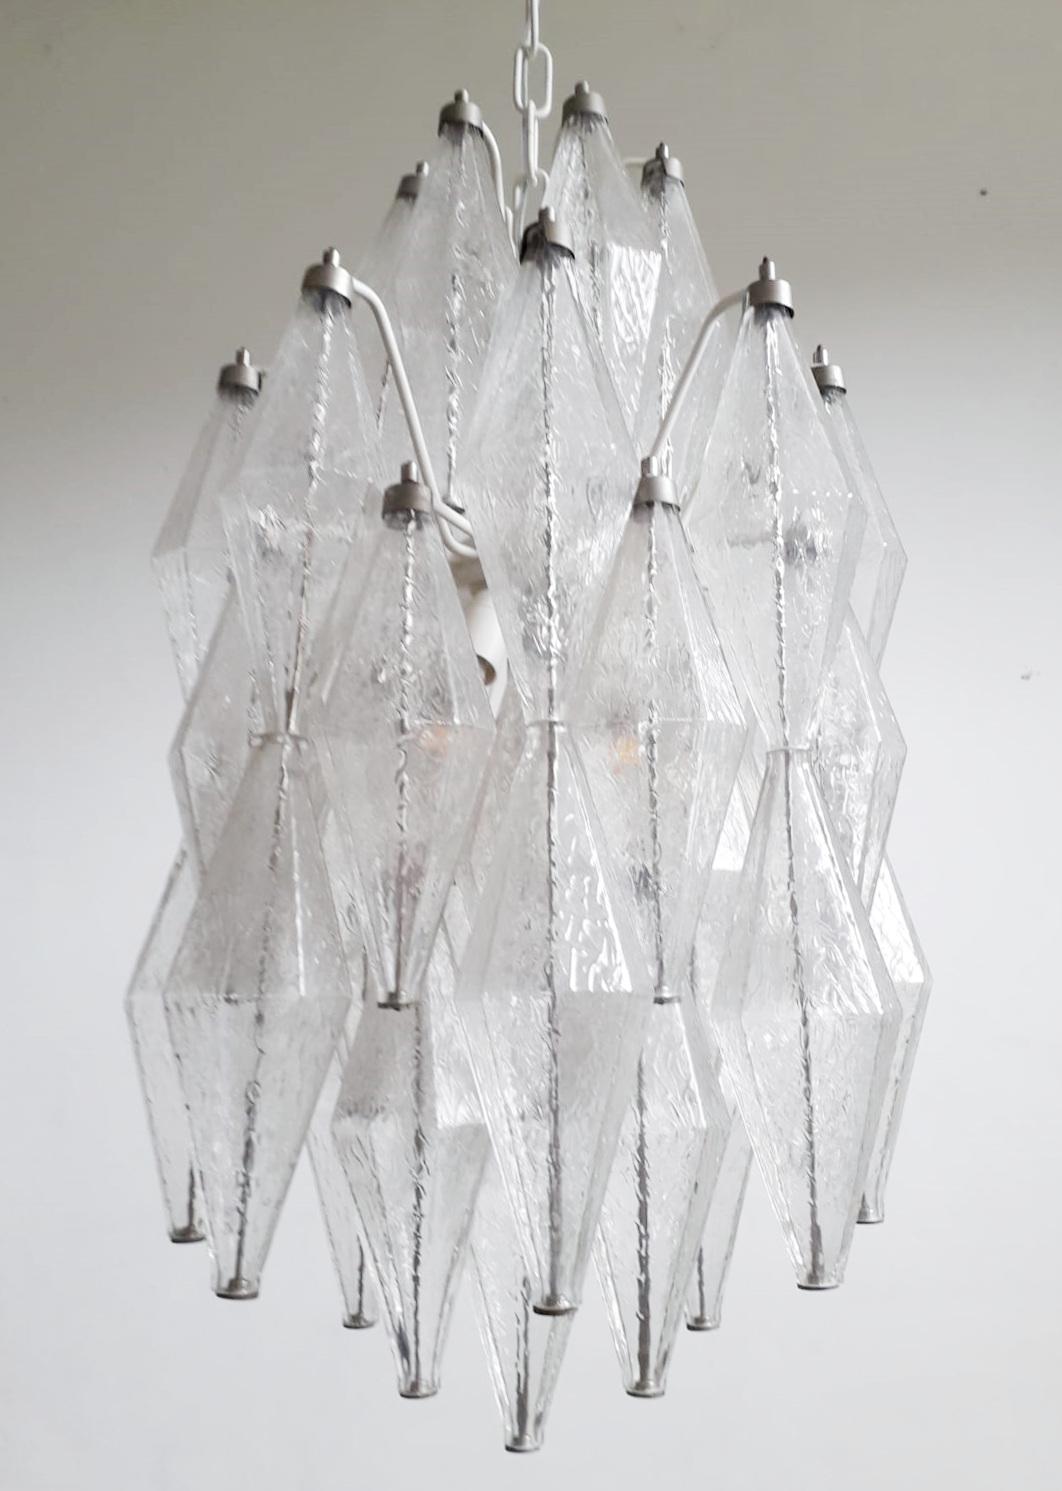 Vintage Italian chandelier with clear hand blown polyhedron/polyhedral shaped Murano glasses suspended on white metal frame / Made in Italy in the style of Venini, circa 1960s
Measures: diameter 15 inches, chandelier height 23.5 inches, total height